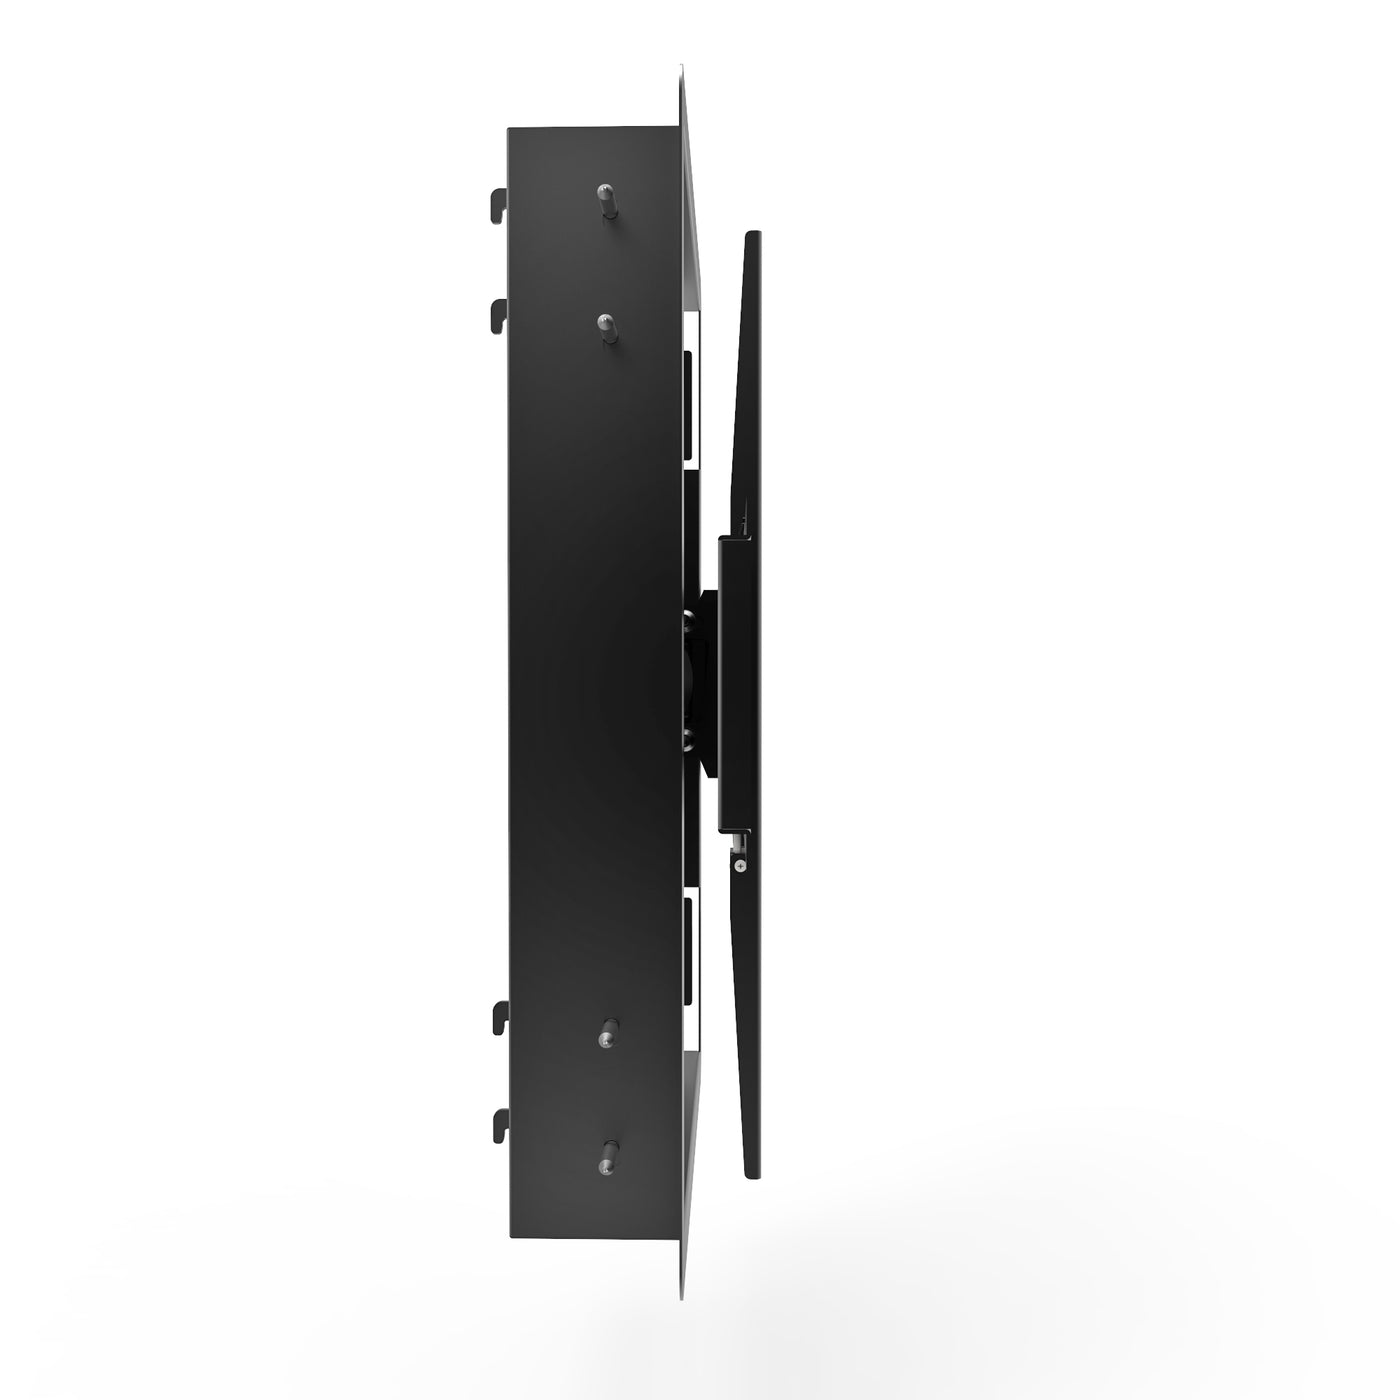 Low Profile Recessed In-Wall Full Motion TV Wall Mount for 46" to 80" TVs - R500